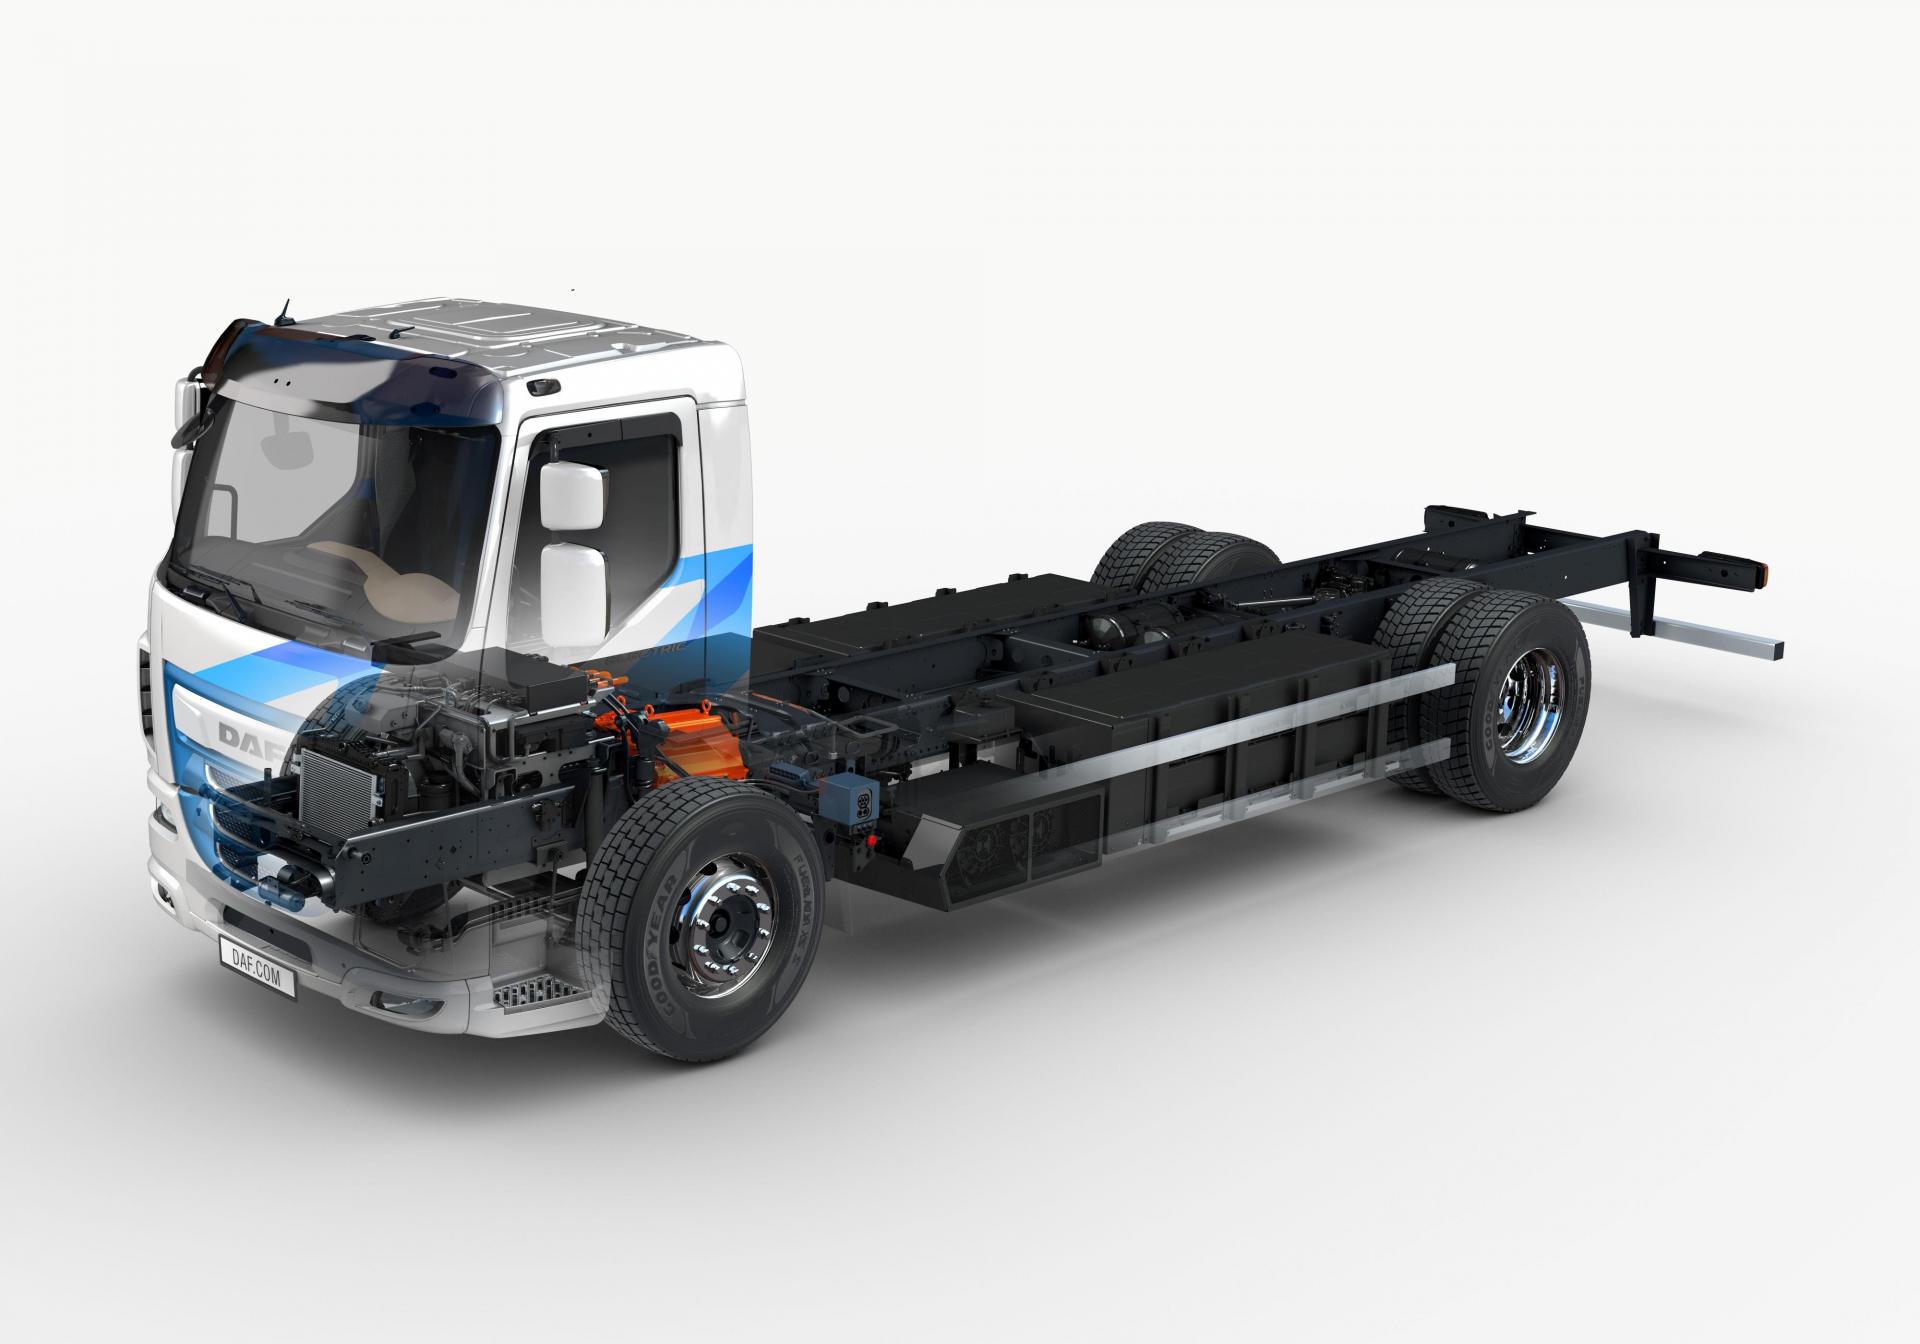 Daf trucks introduces lf electric ghost view